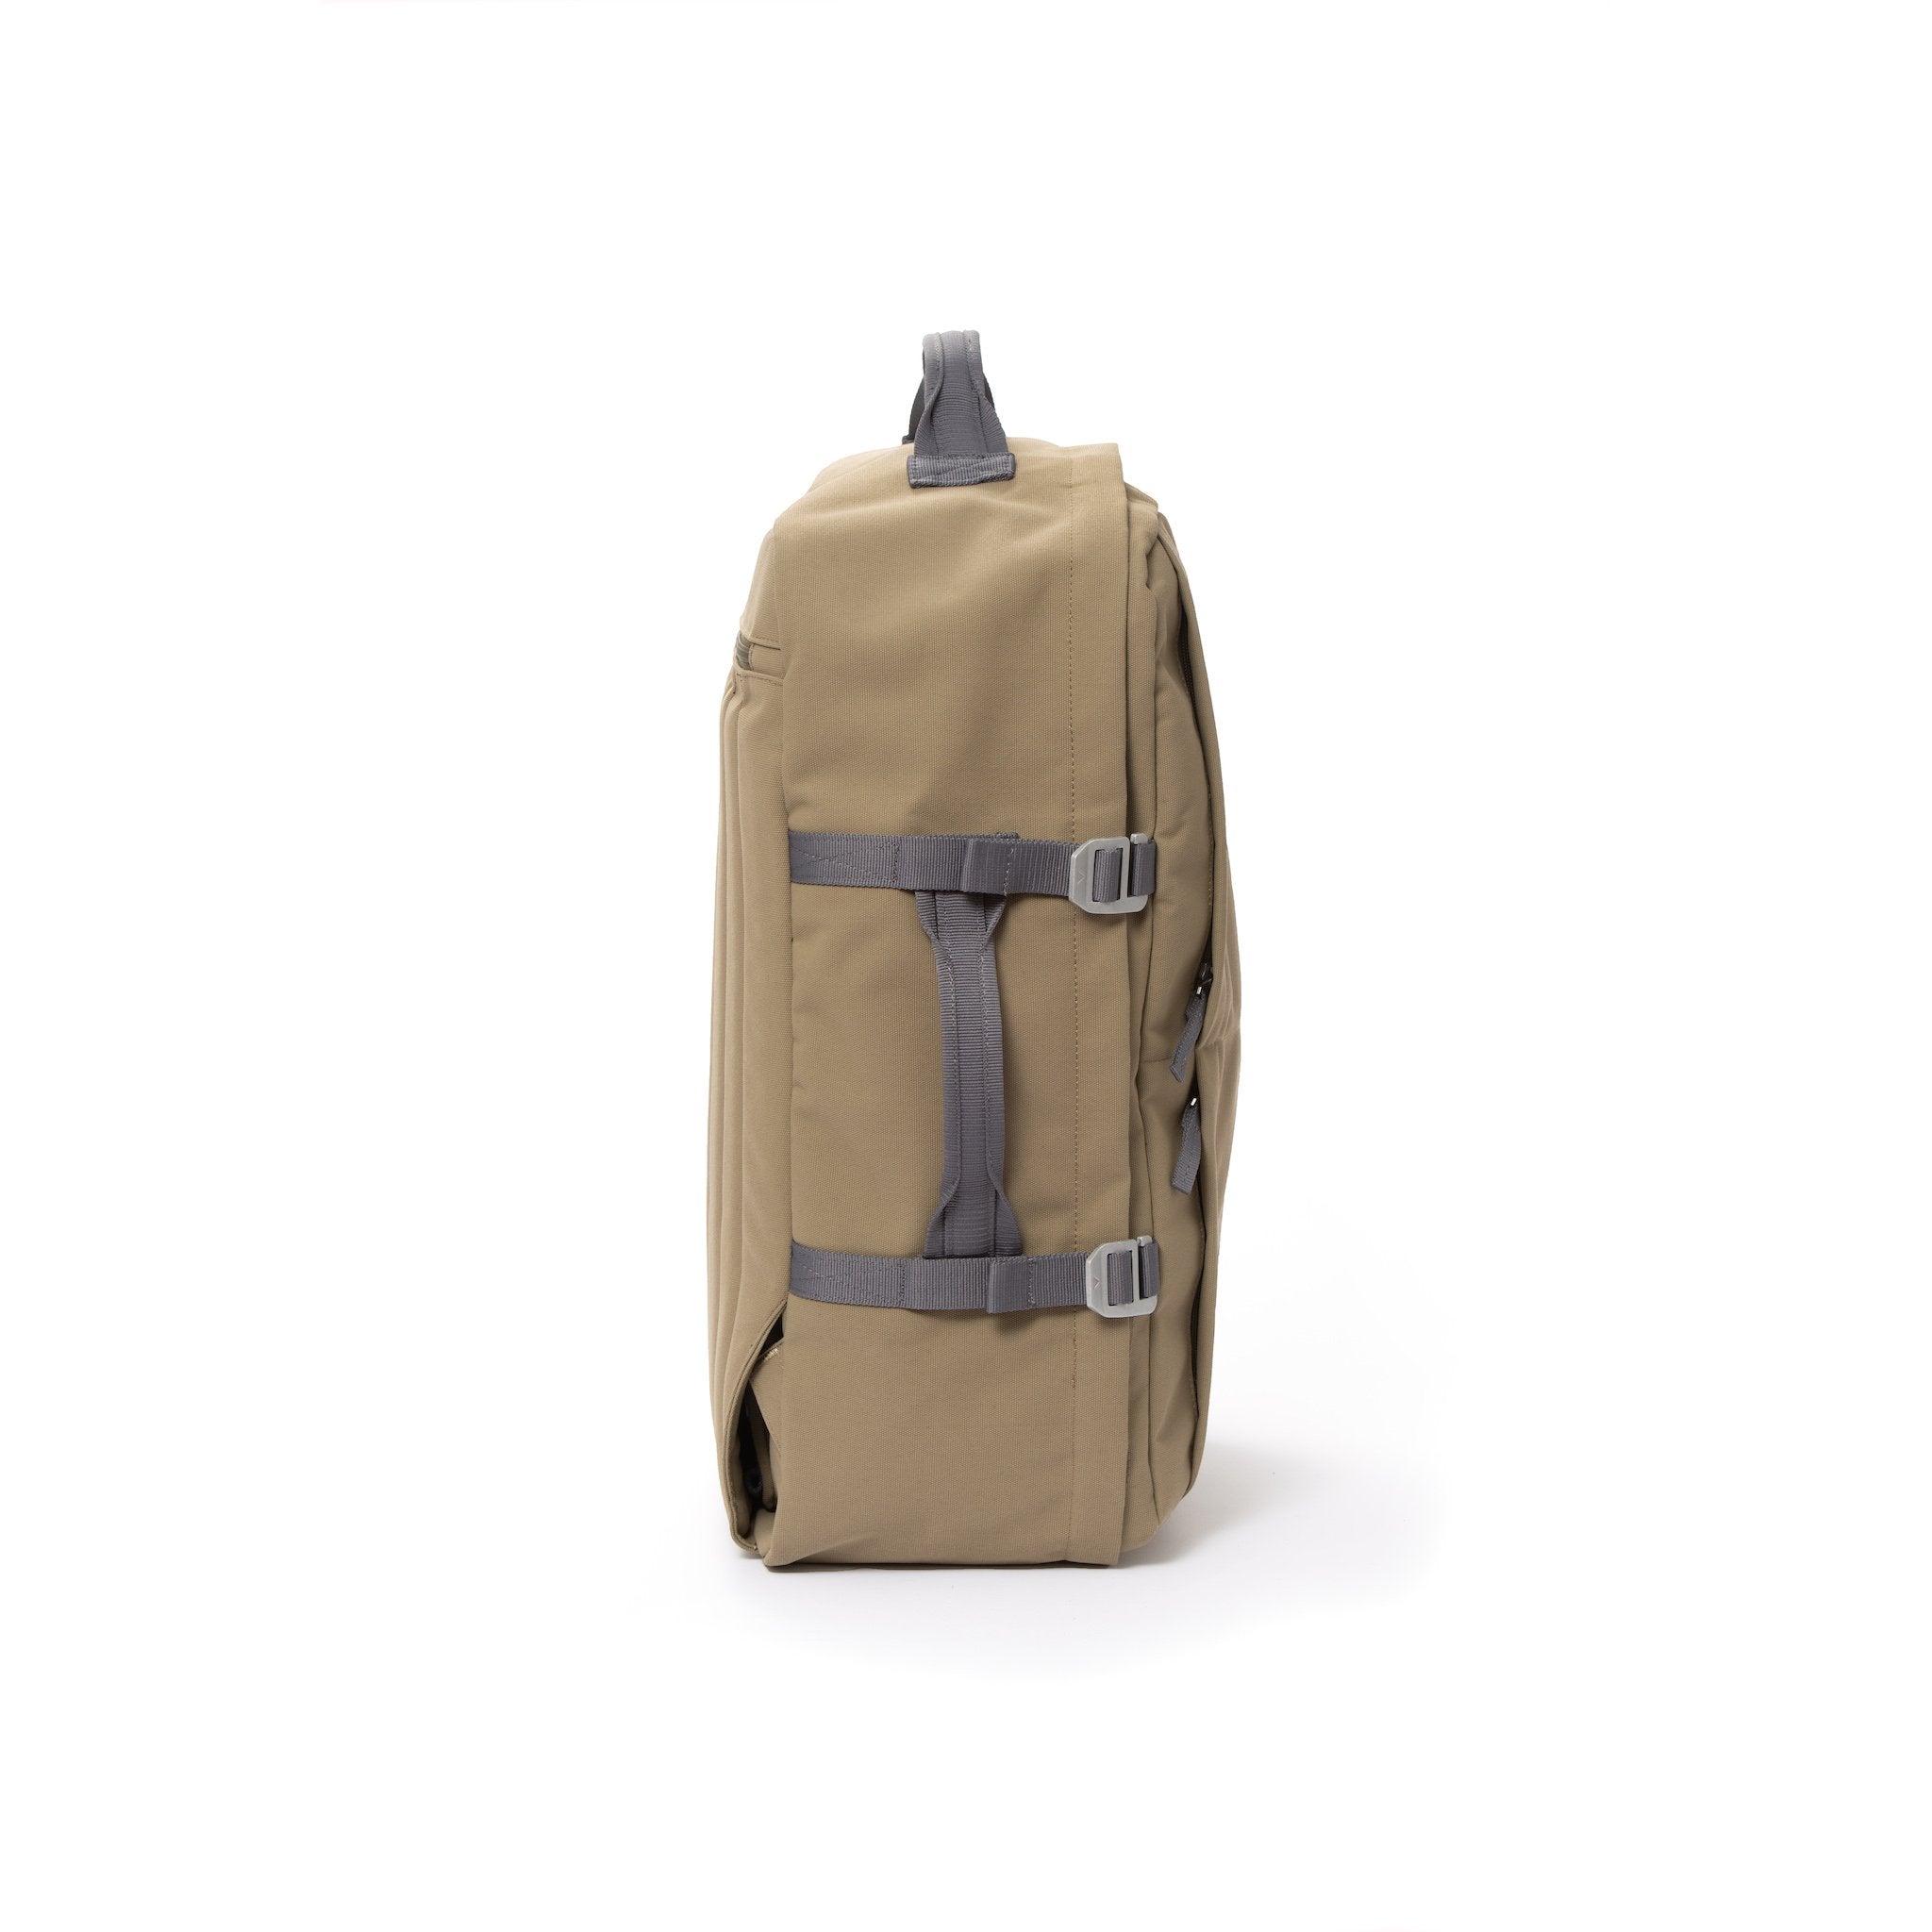 Khaki recycled canvas travel backpack with compression side straps.